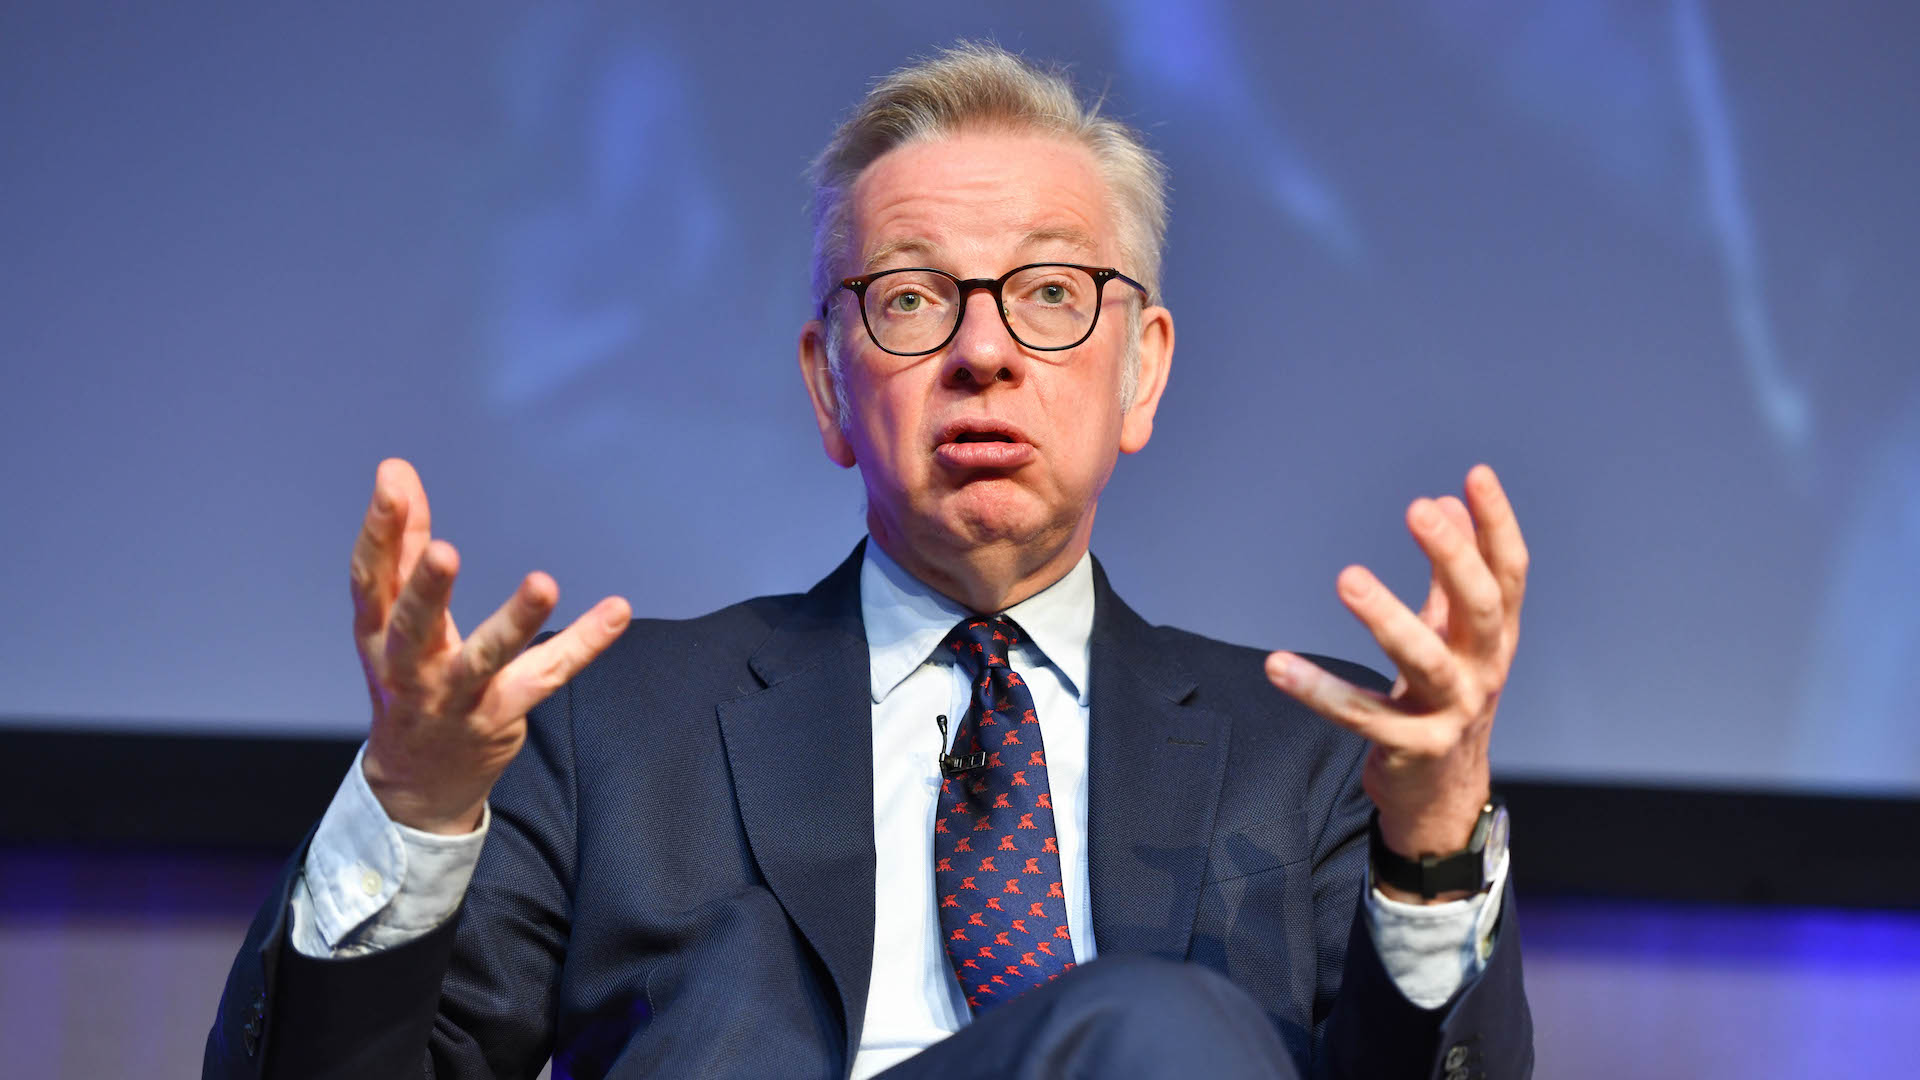 Michael Gove sits in a dark suit, light shirt, dark tie with his hands held out in front of him